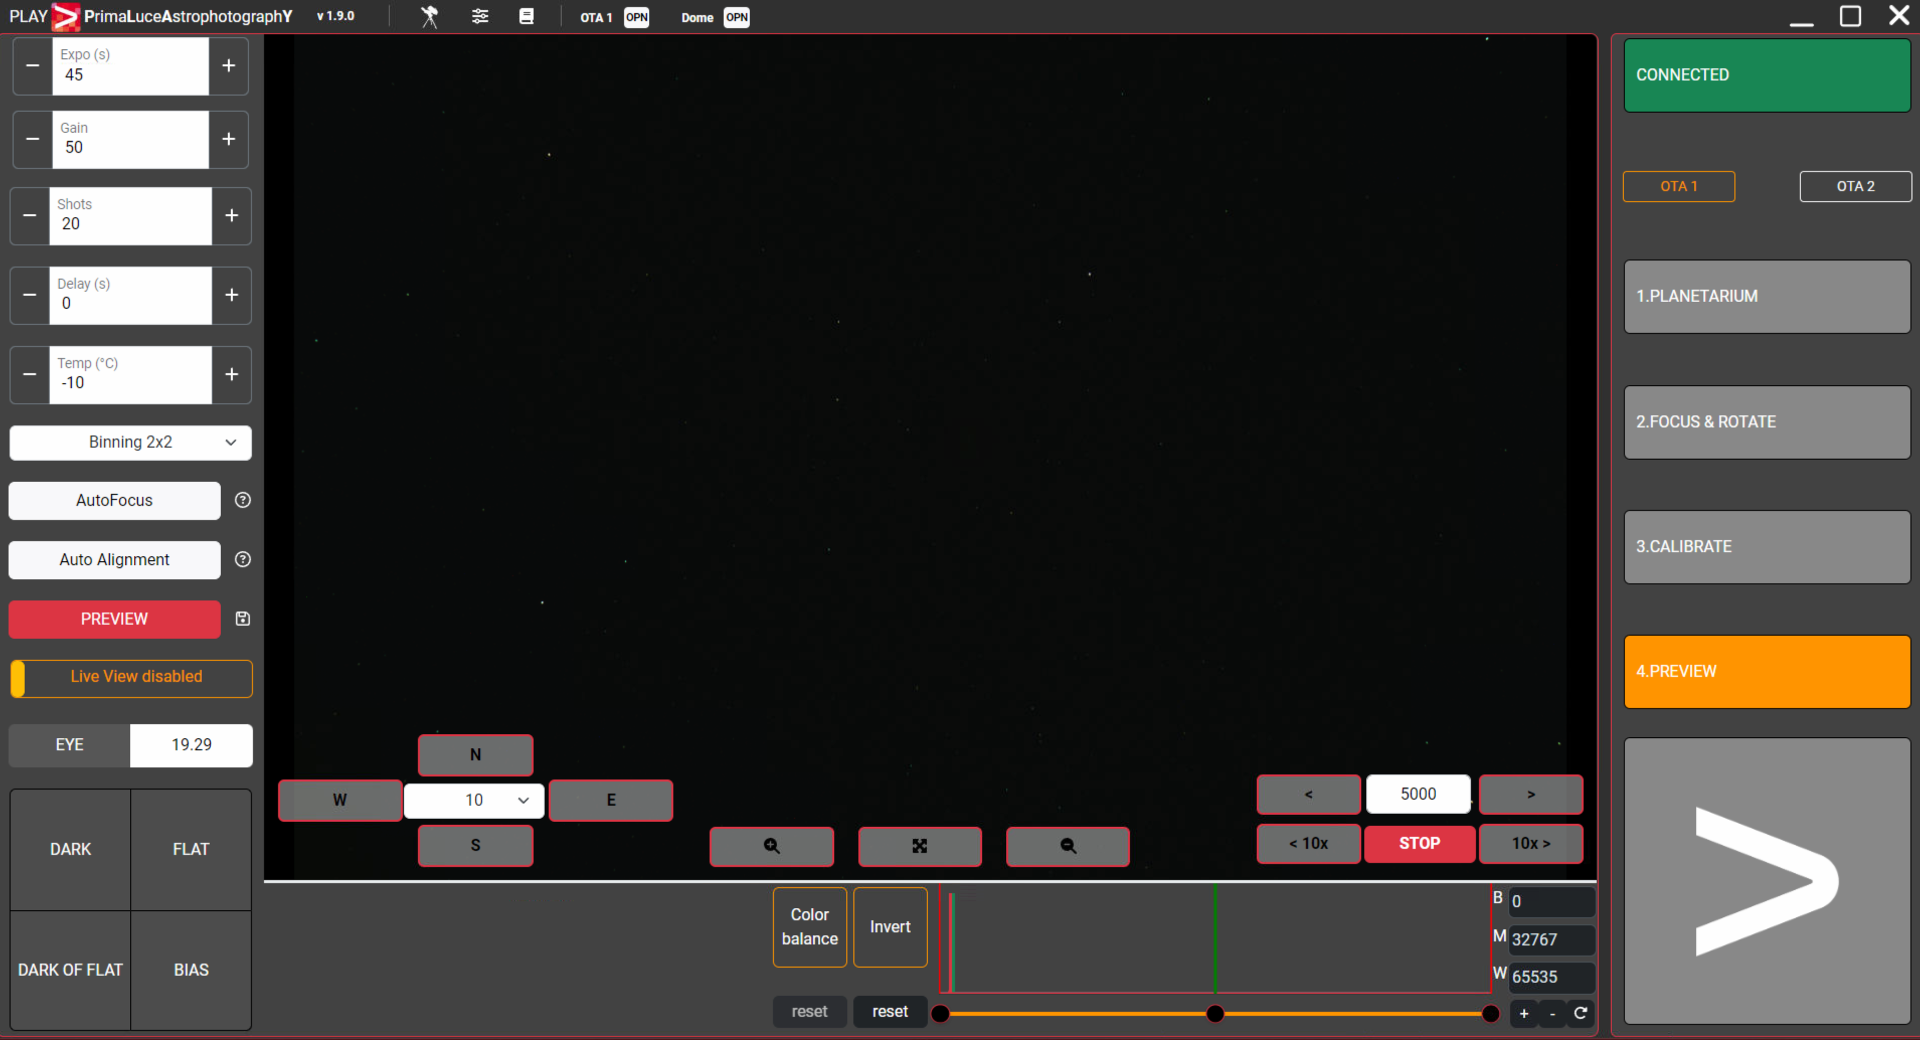 PLAY, how to use PREVIEW tab to set your camera and start image acquisition